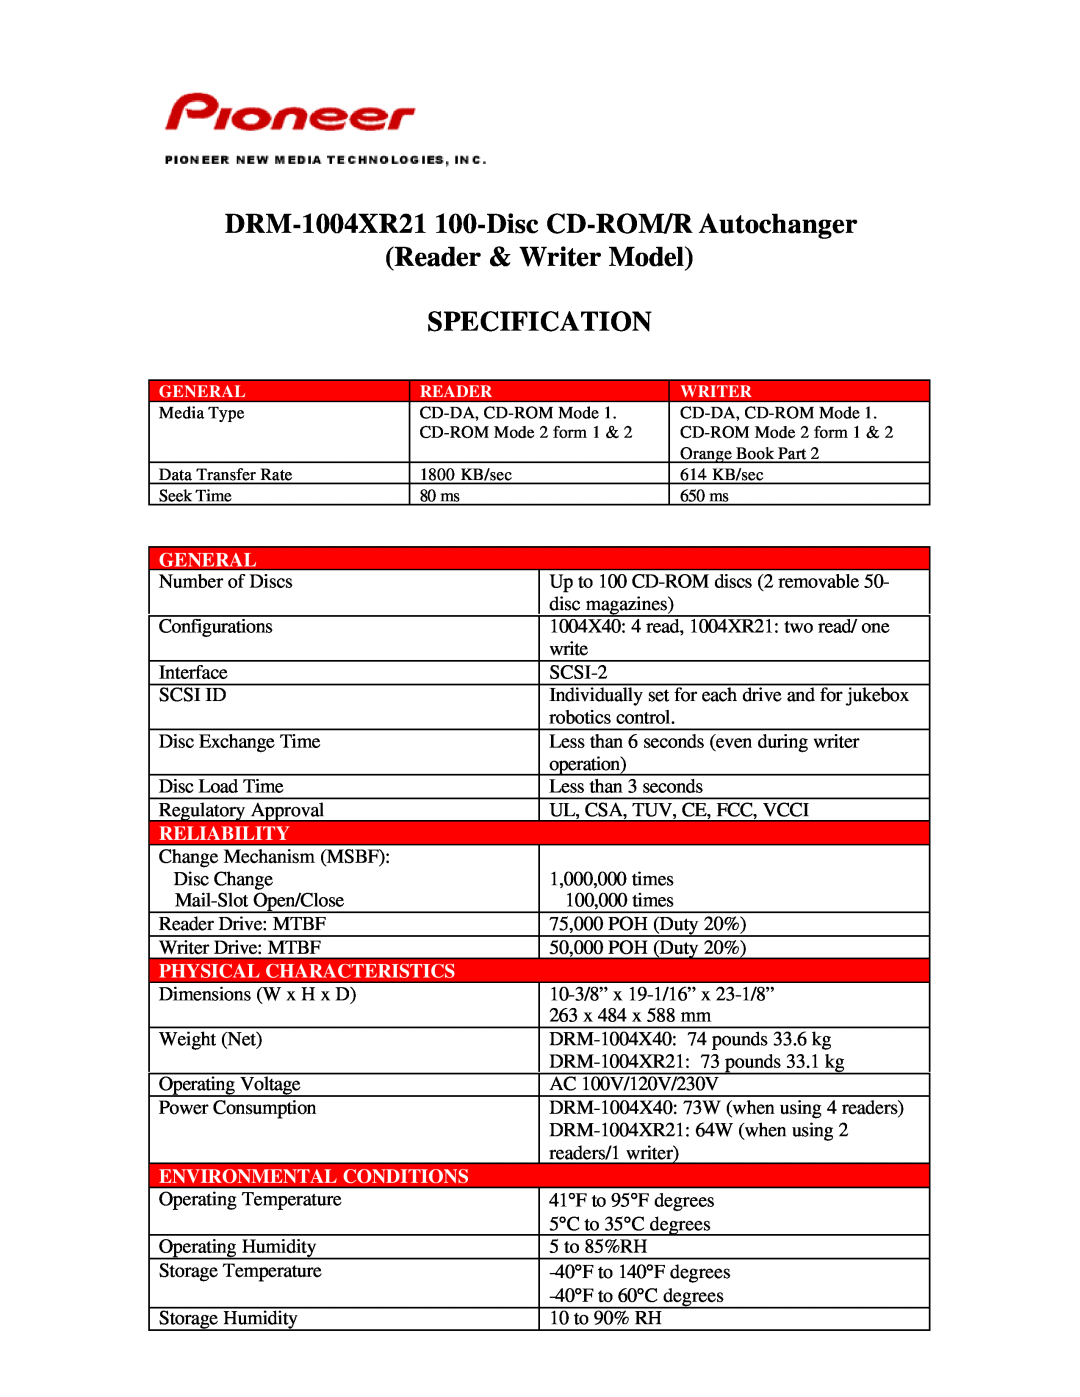 Pioneer dimensions DRM-1004XR21 100-Disc CD-ROM/RAutochanger, Reader & Writer Model SPECIFICATION, General, Reliability 